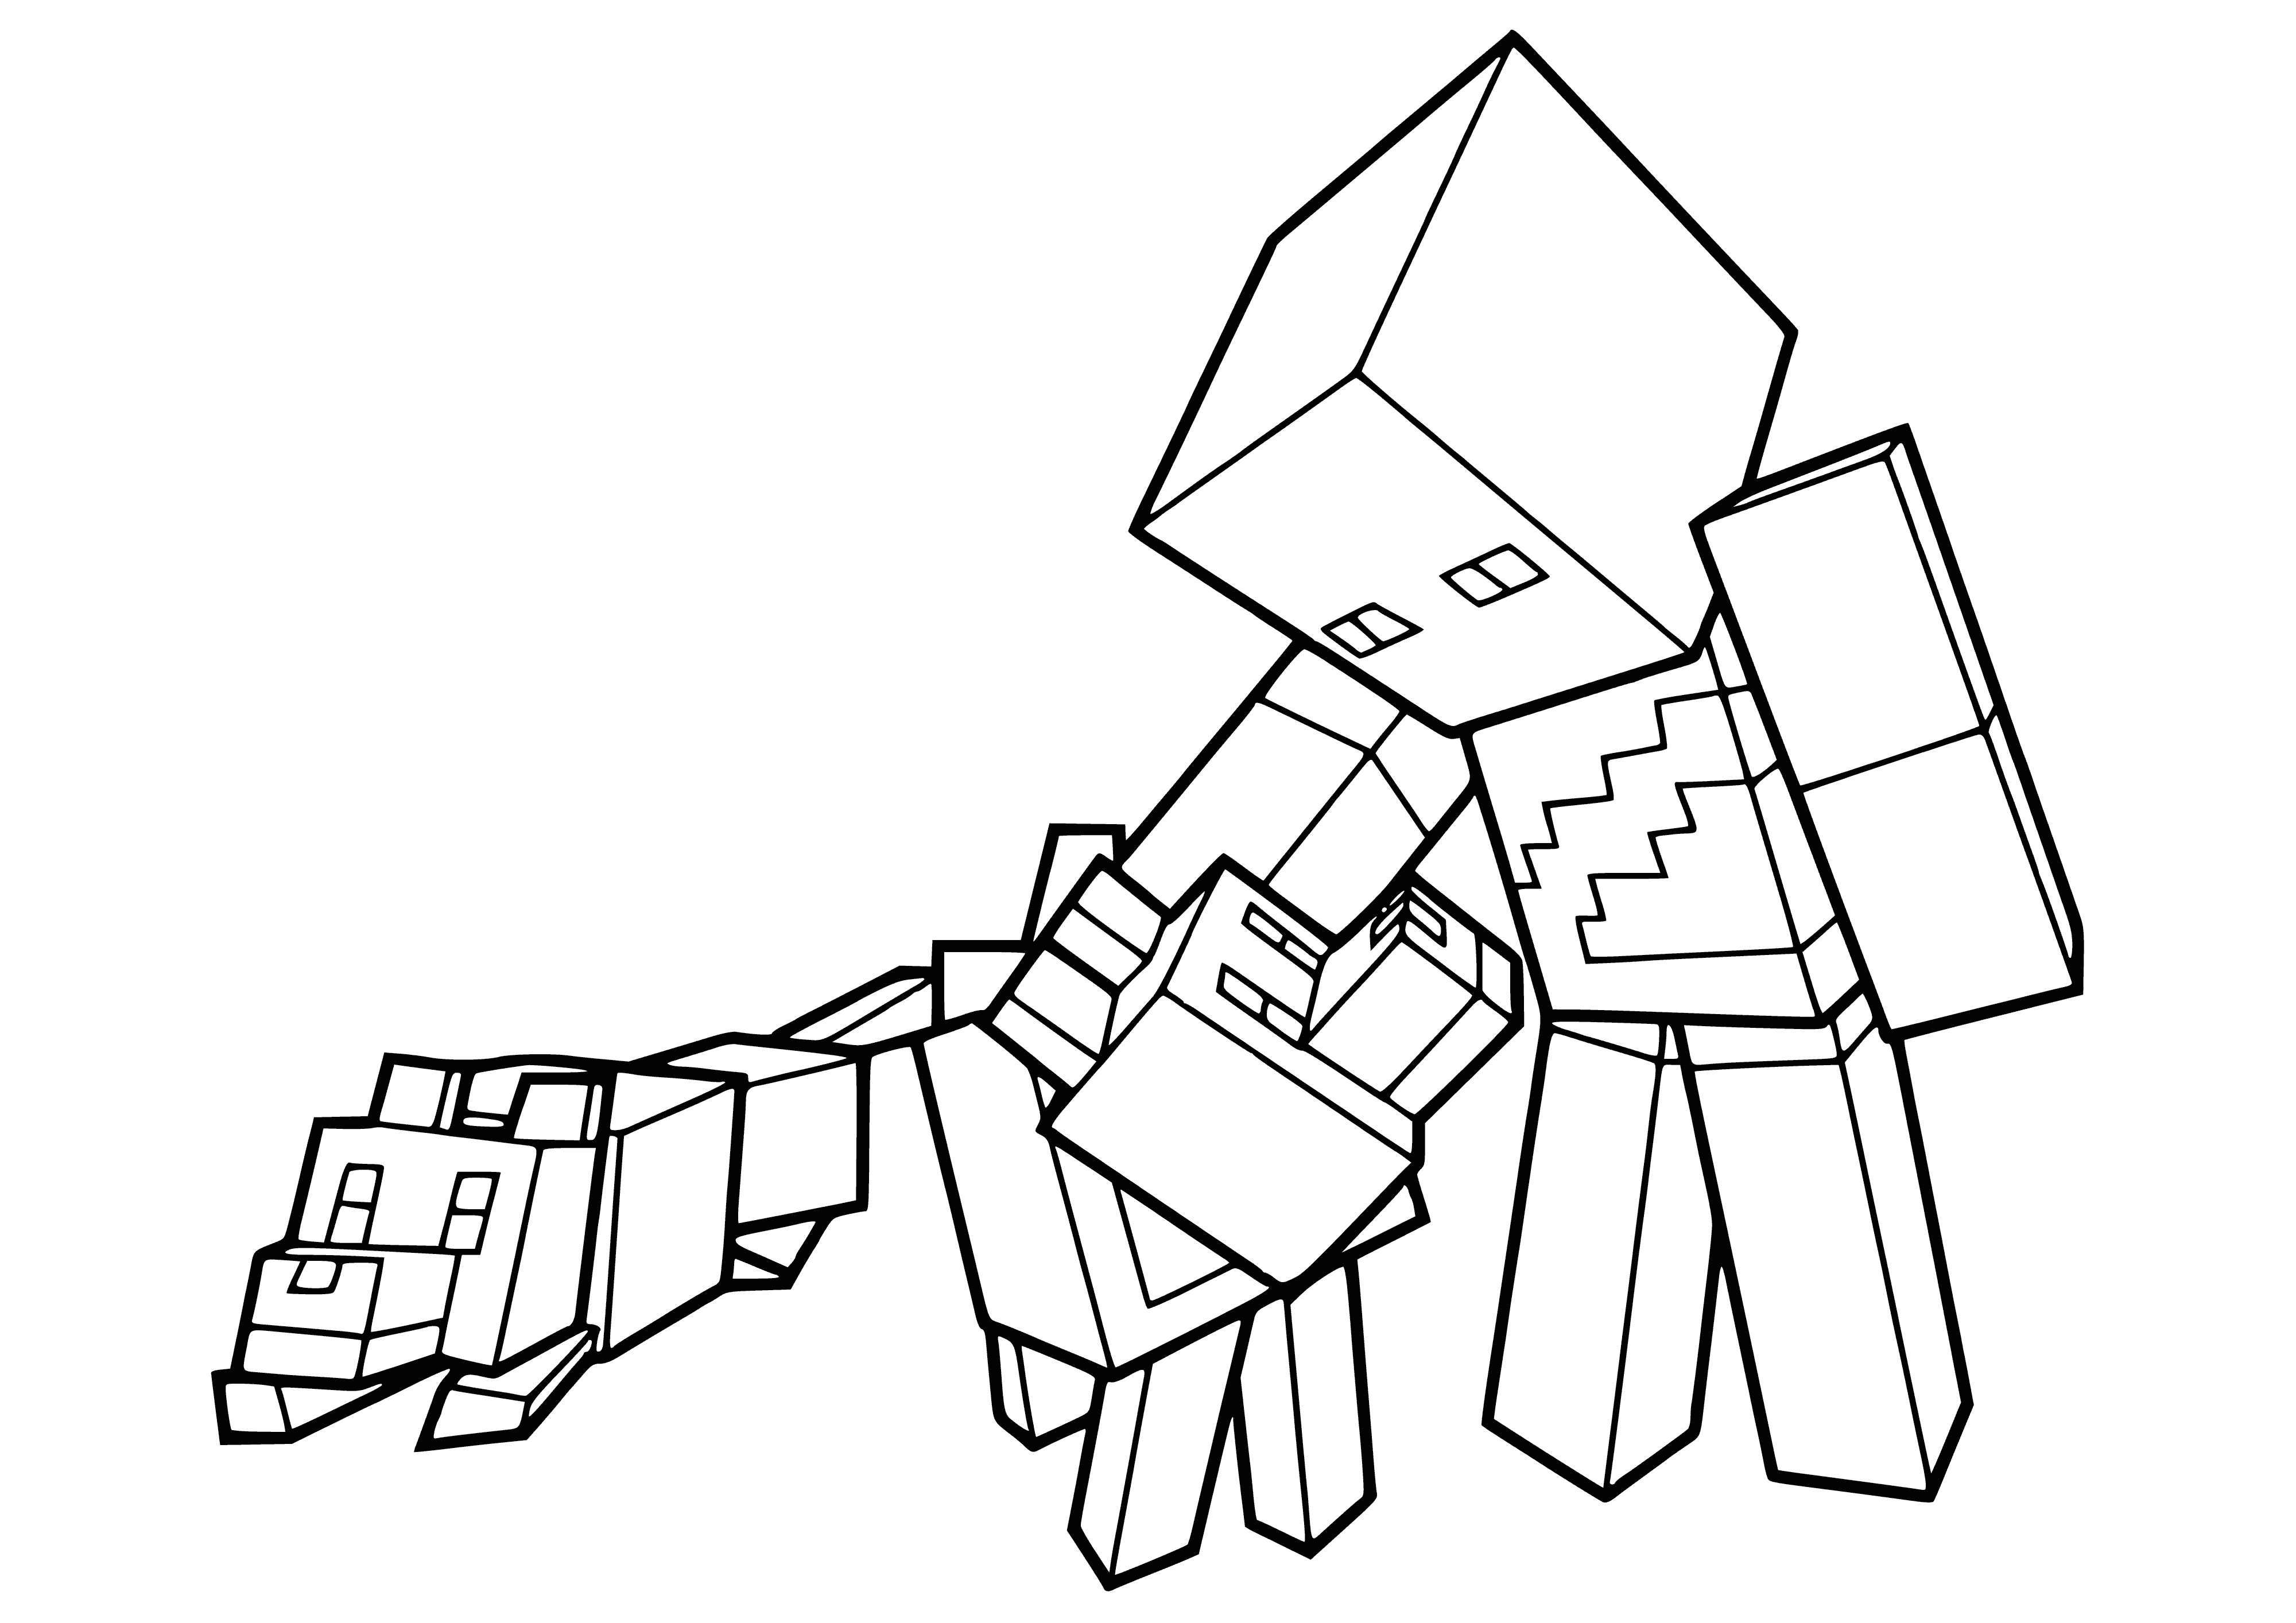 coloring page: Player sits on ground with two dogs, one brown, one white. Holding a bone and looks like they're giving it to brown dog. #Minecraft